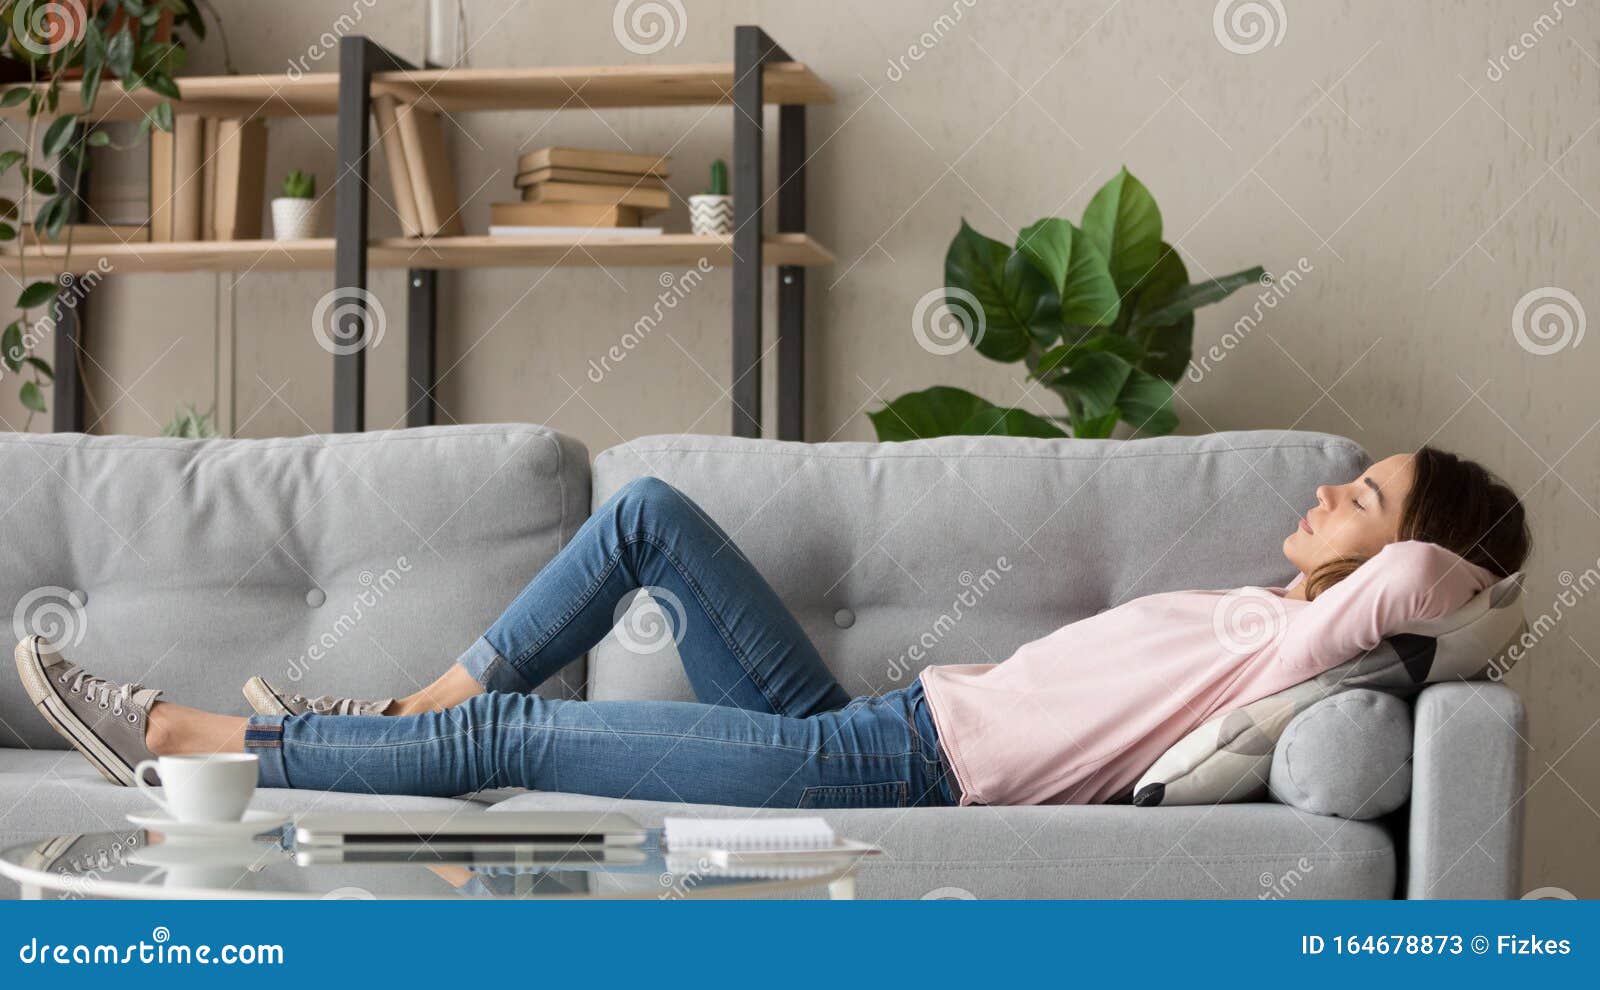 tired young woman relax at home sleeping on cozy couch